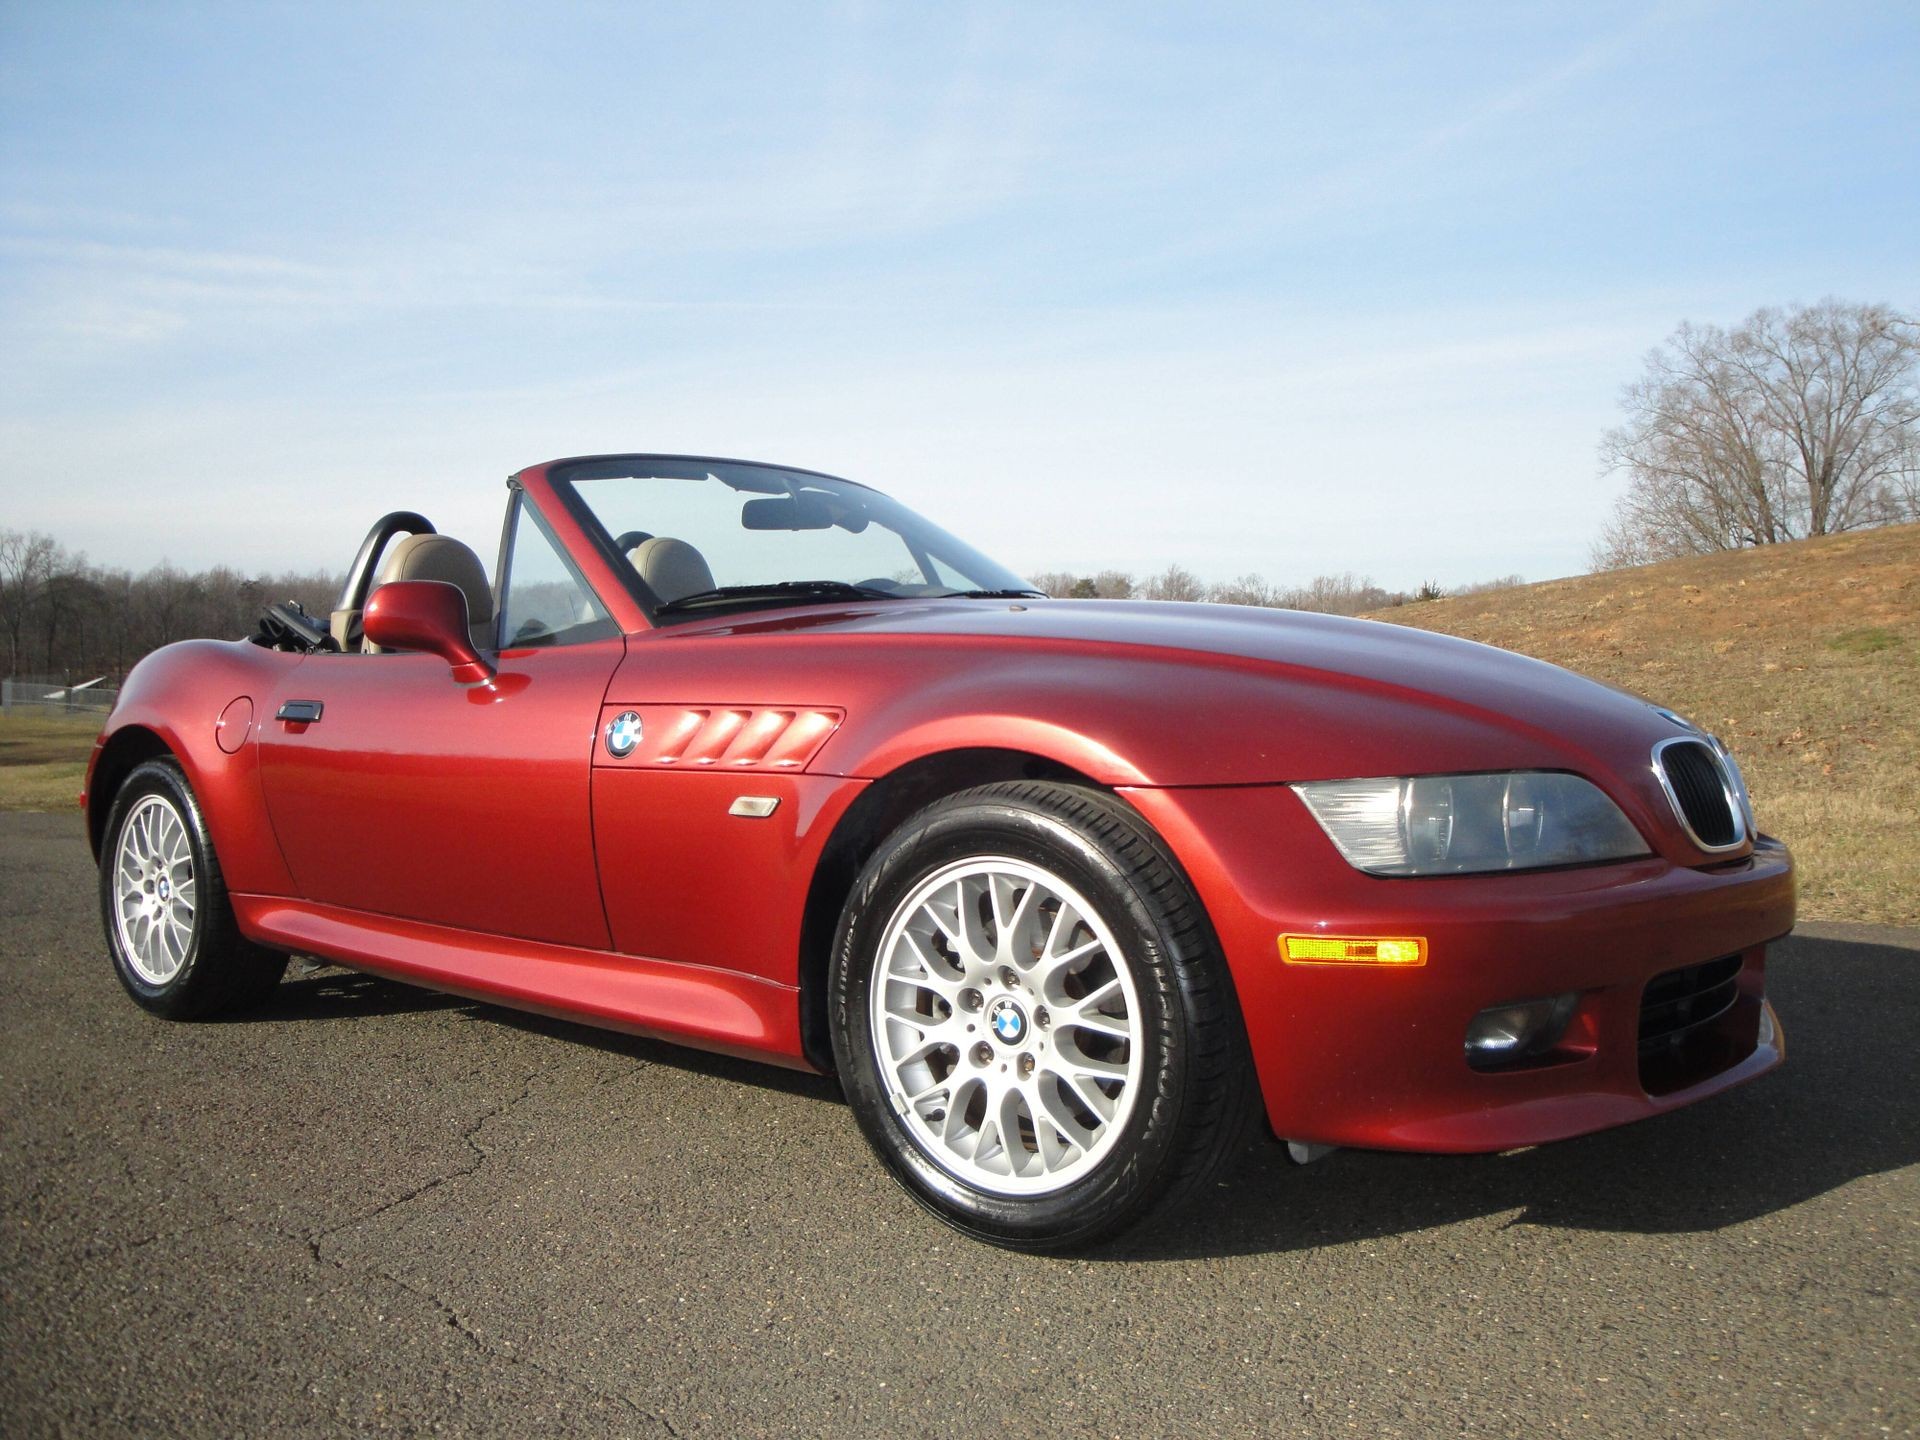 Find Of The Day: This 2001 BMW Z3 2.5i Roadster Is An Appreciating Modern Classic